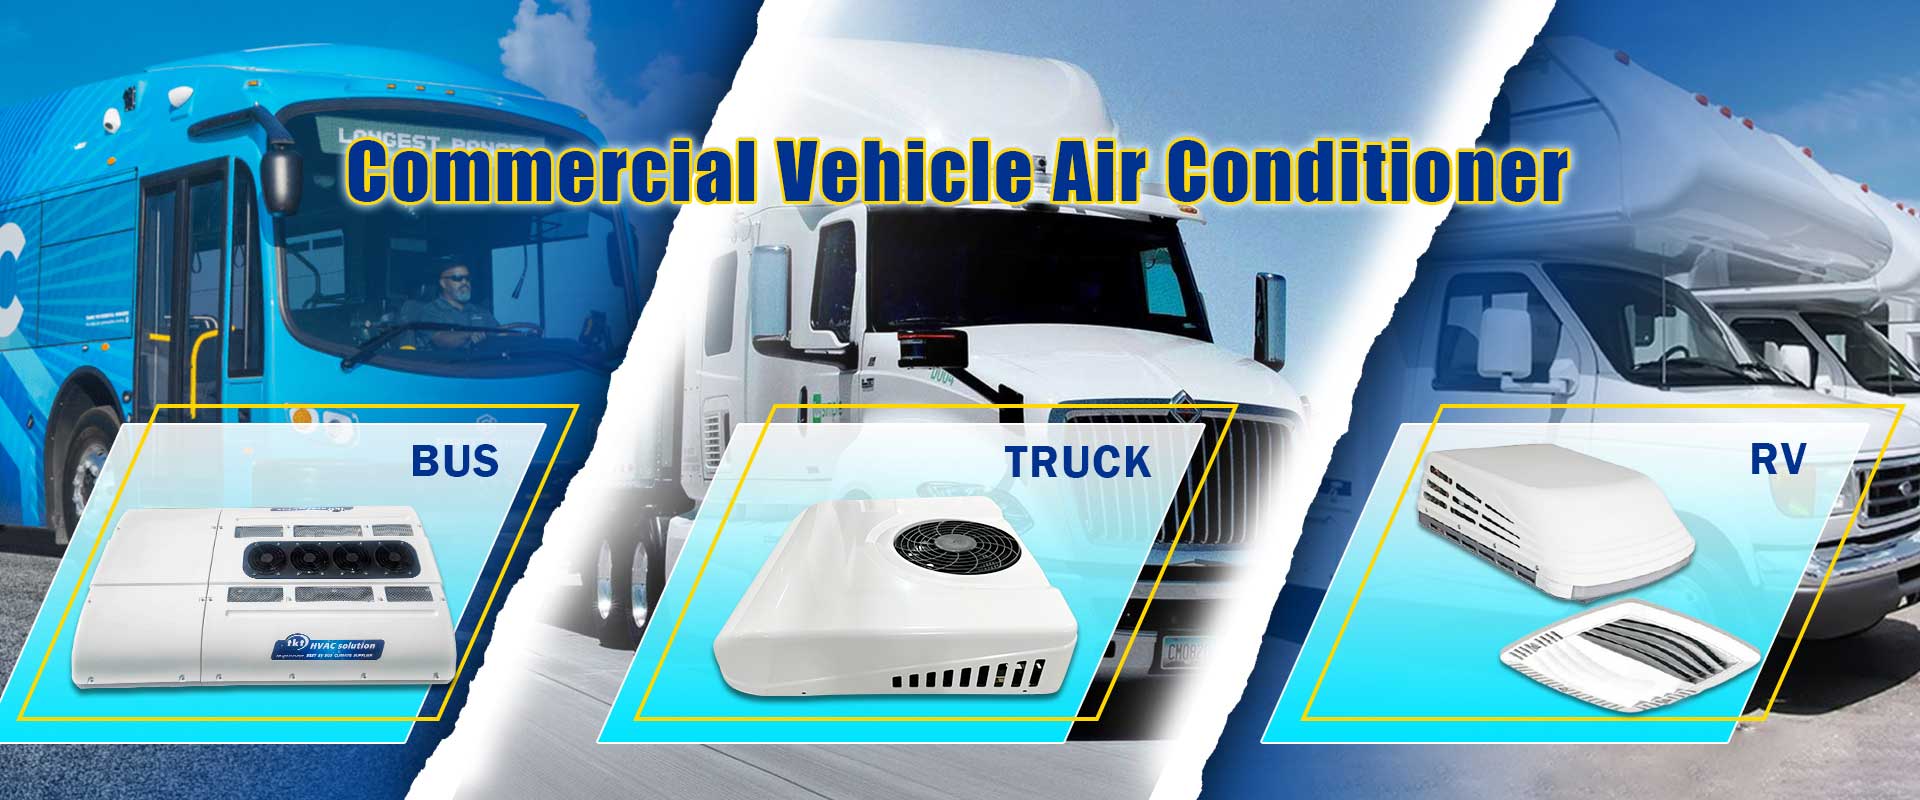 commercial vehicle air conditioner